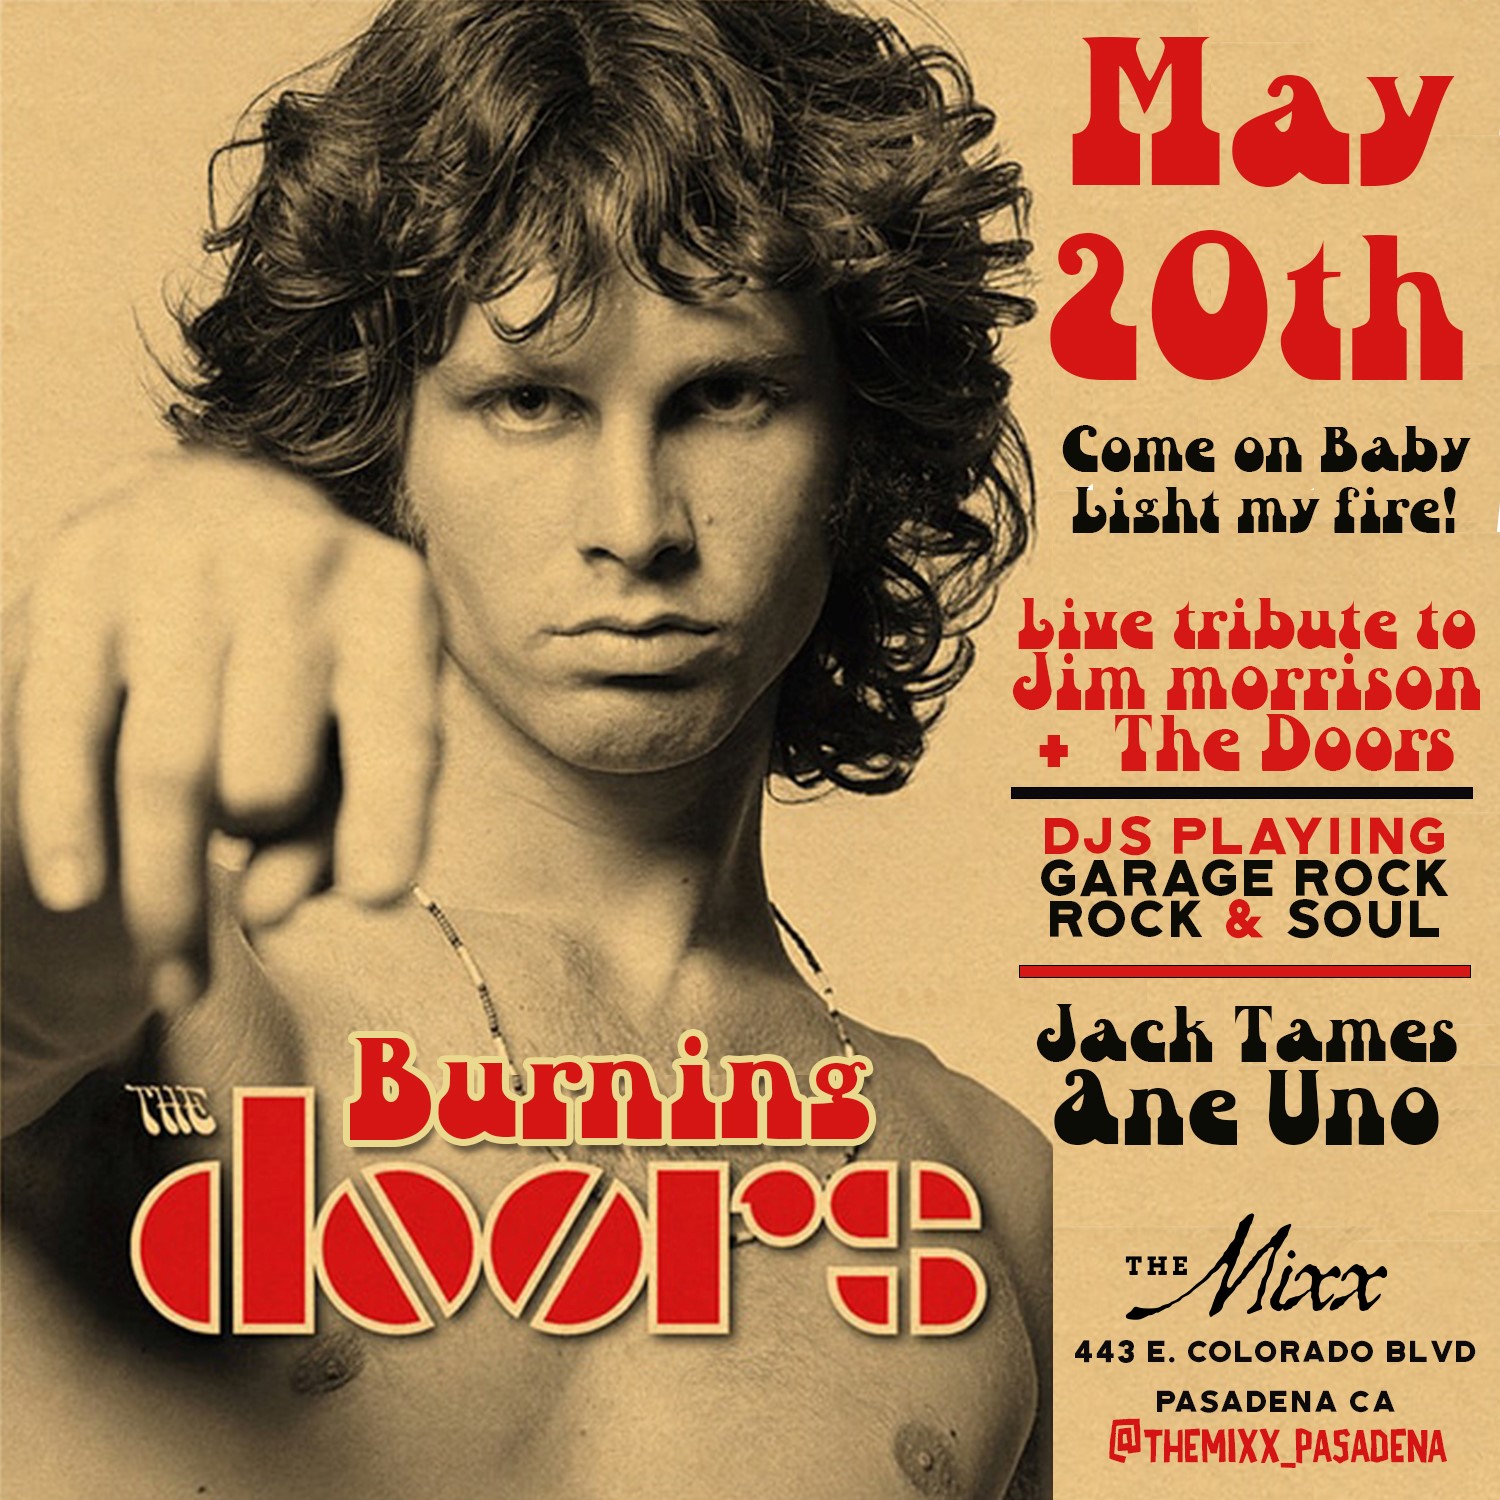 You are currently viewing Live tribute to The Doors by The Burning Doors